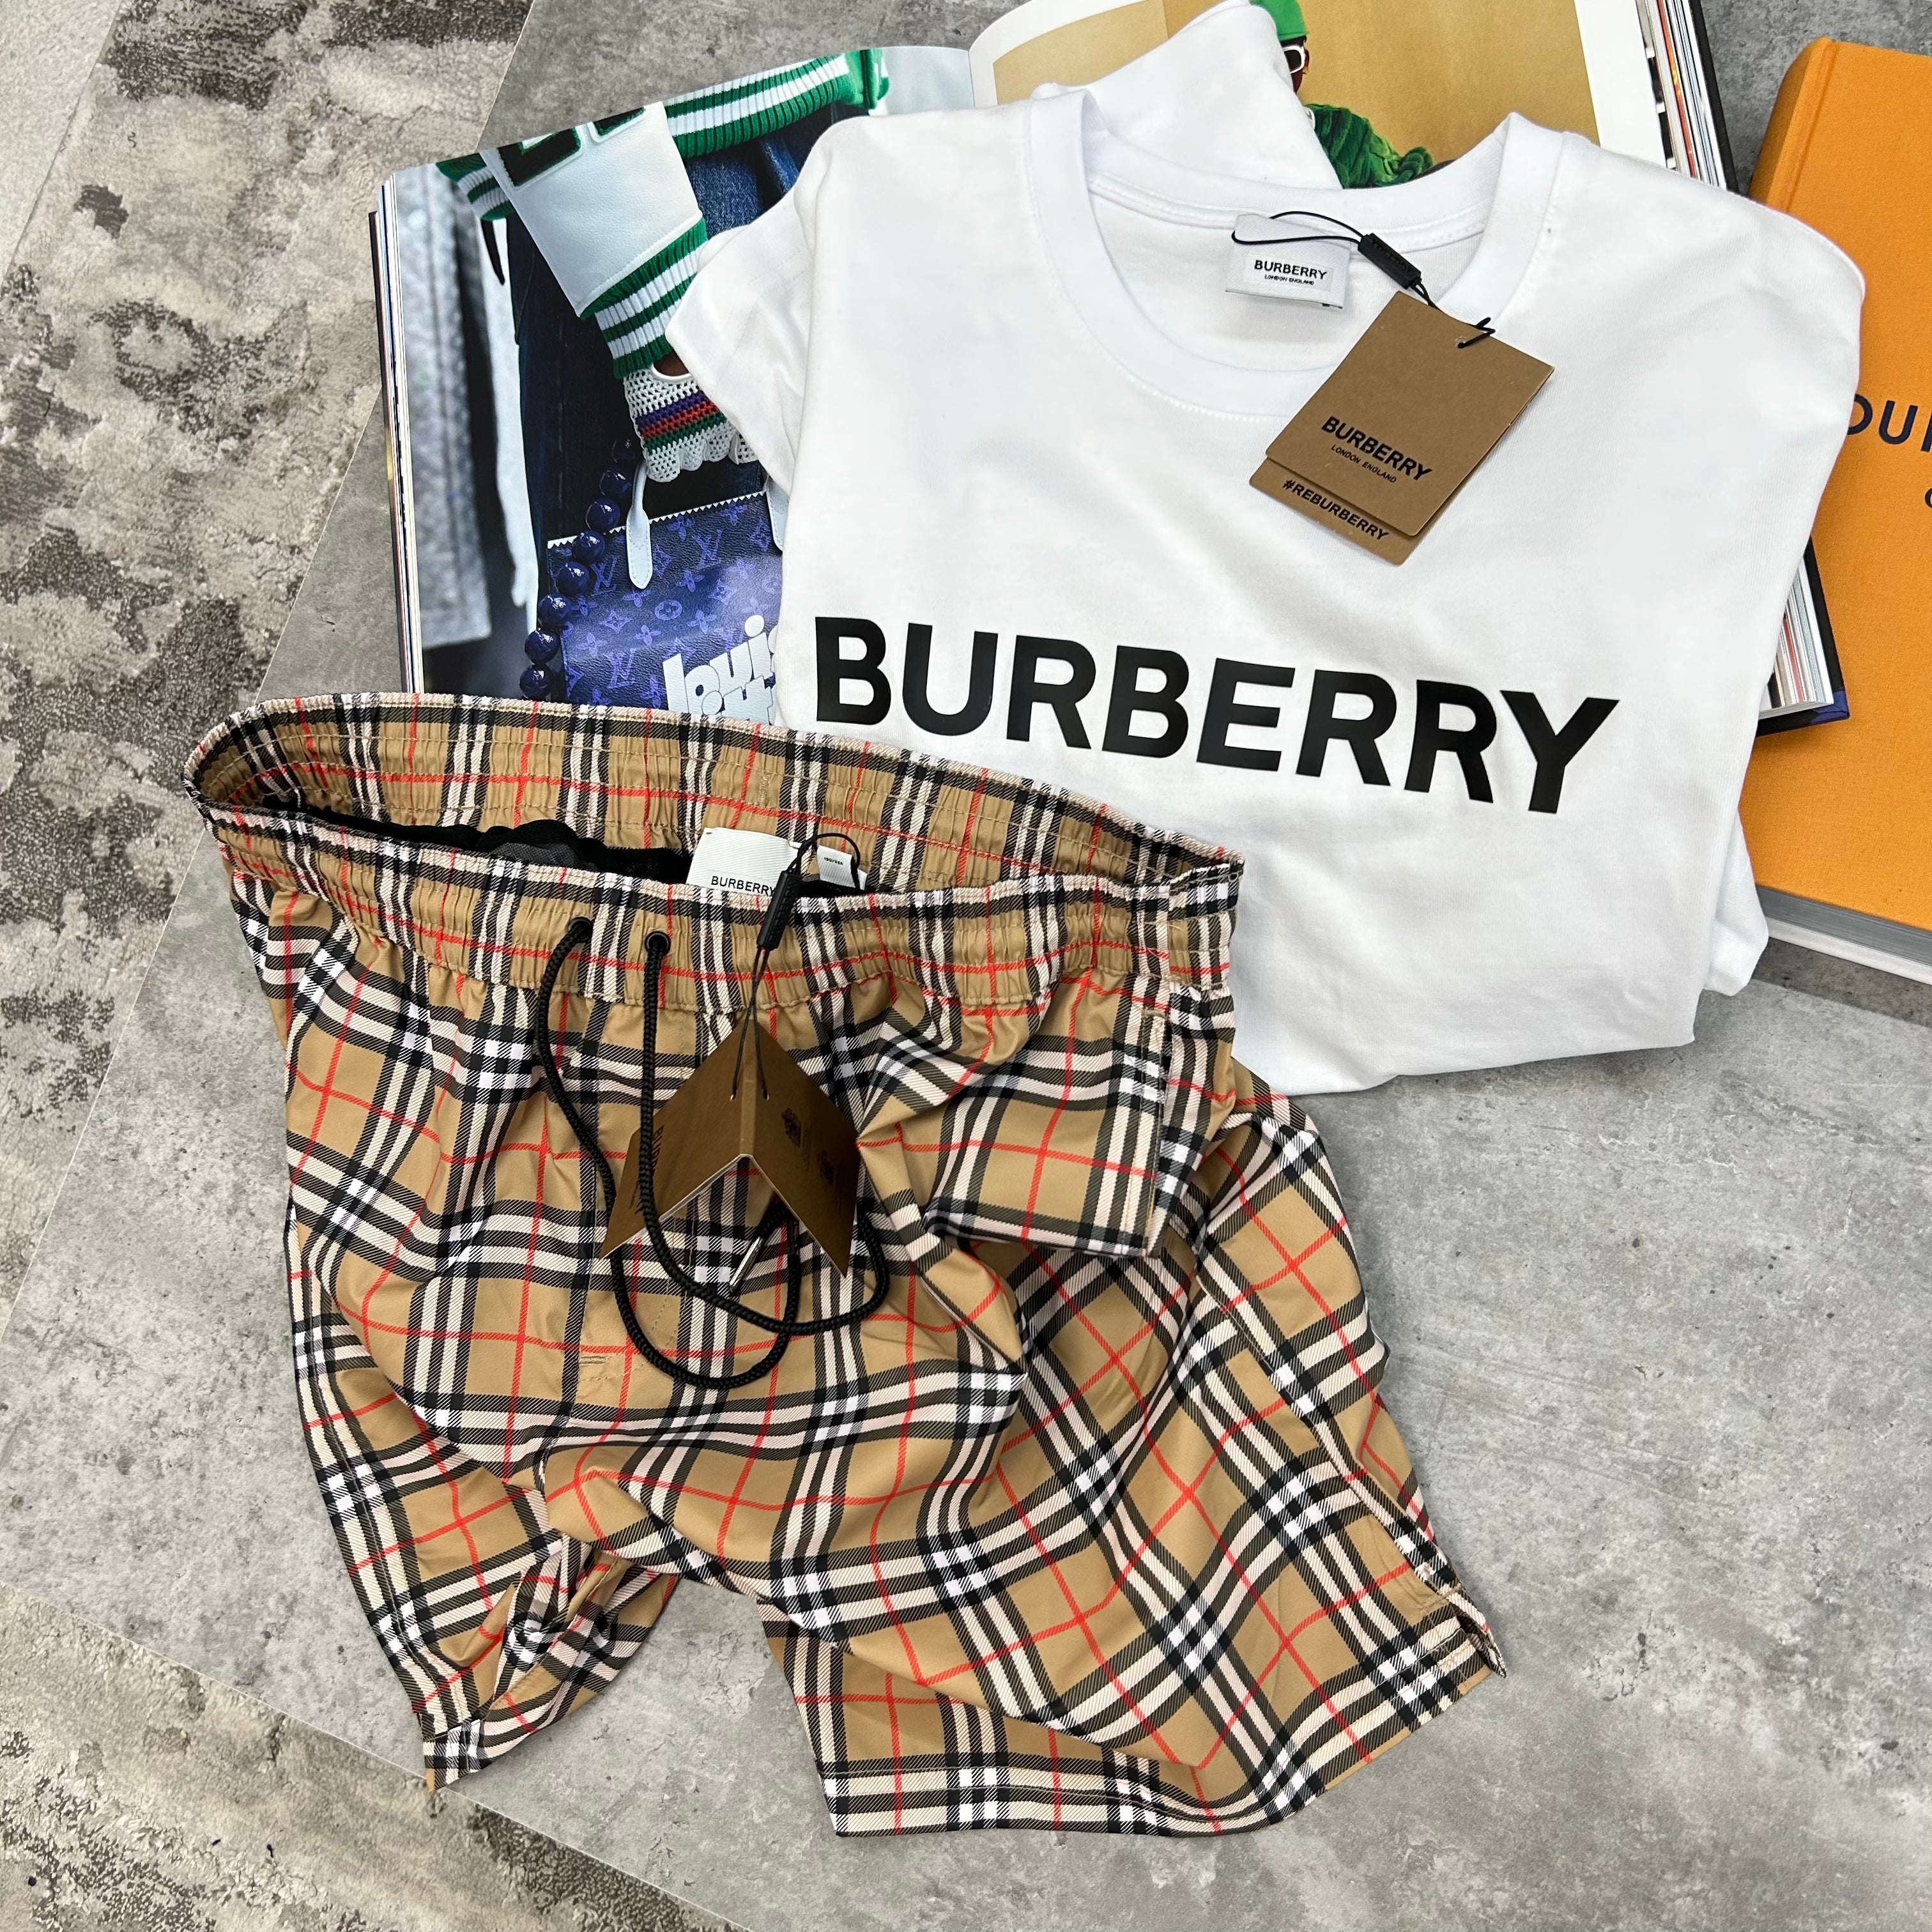 BURBERRY SHORTS - BROWN